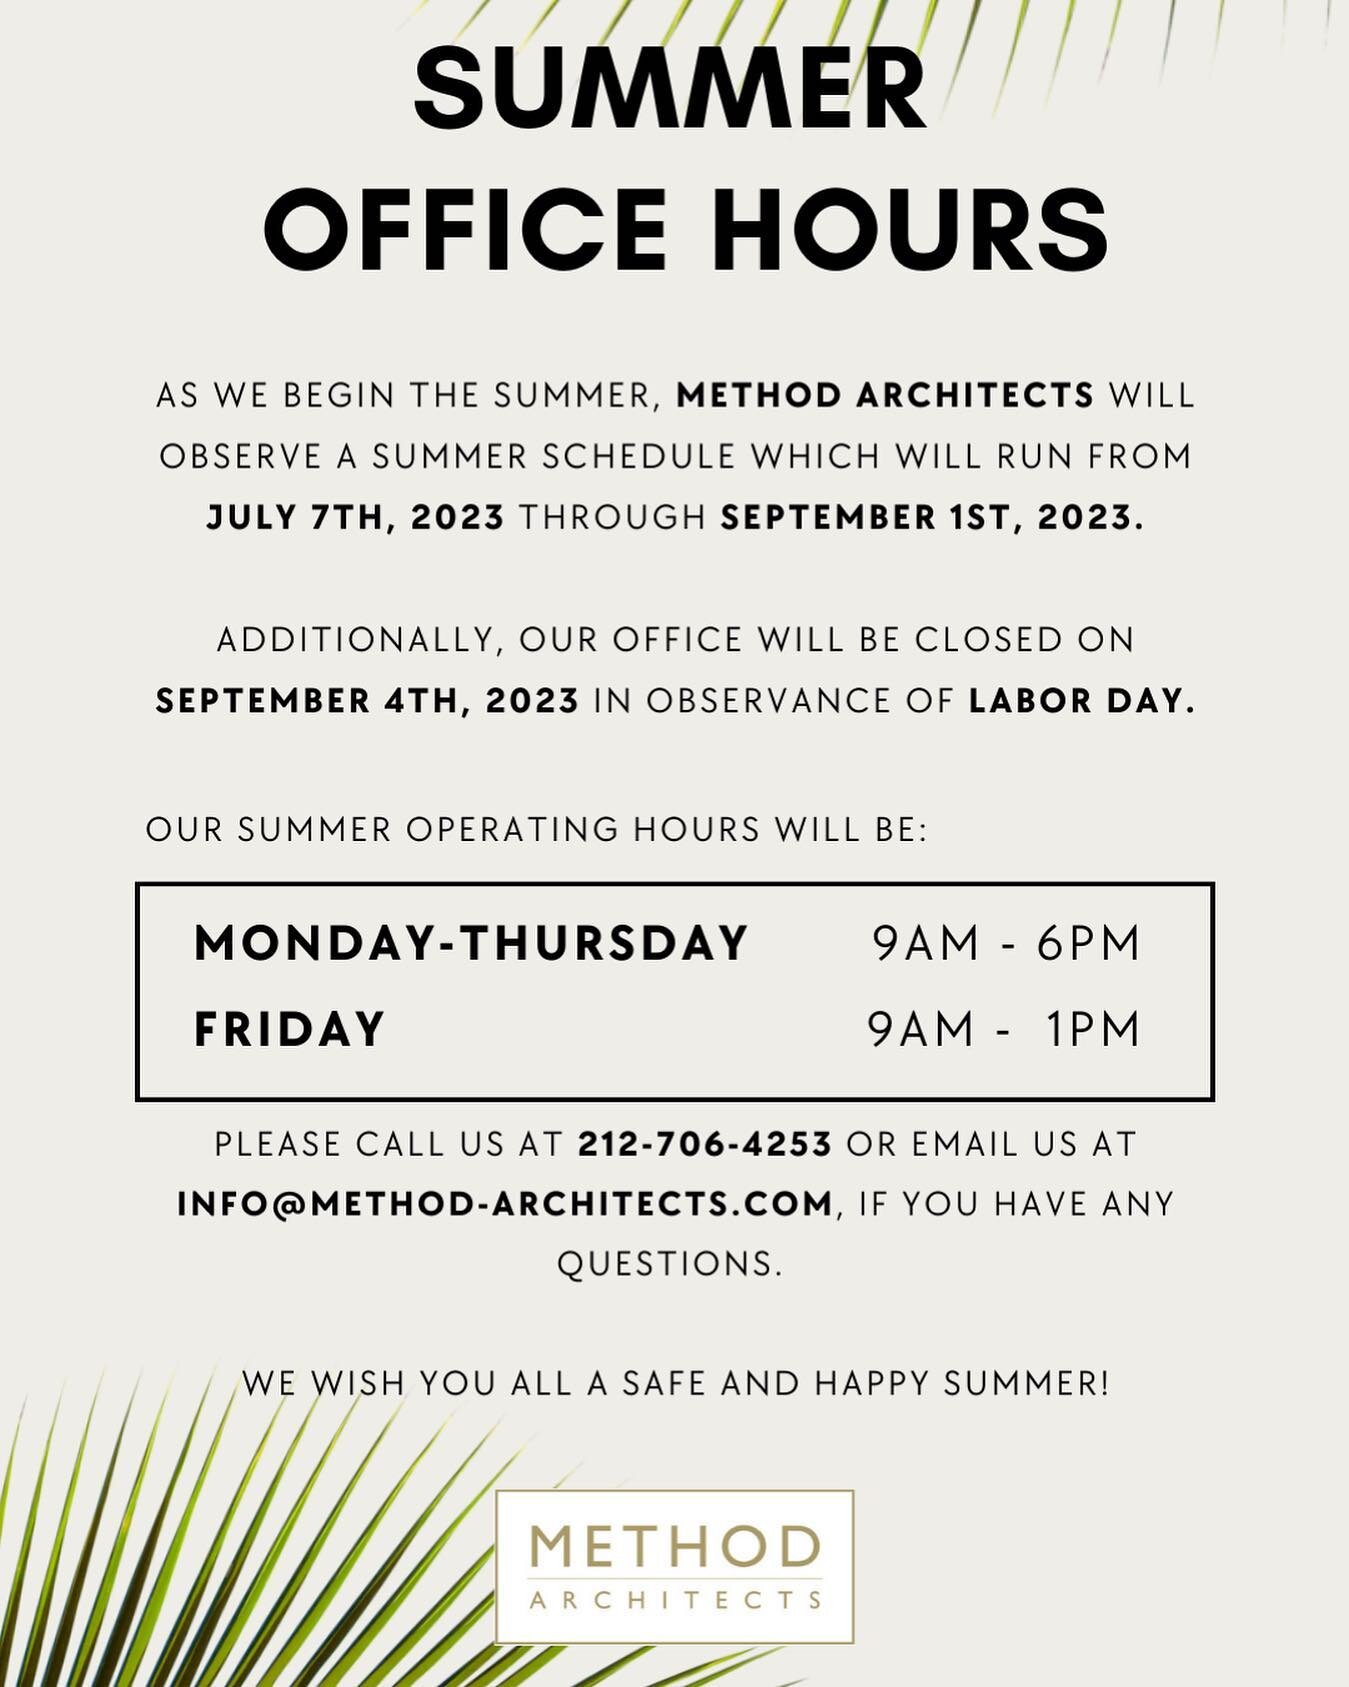 PLEASE NOTE THAT AS WE BEGIN THE SUMMER, METHOD ARCHITECTS WILL OBSERVE A SUMMER SCHEDULE WHICH WILL RUN FROM JULY 7TH, 2023 THROUGH SEPTEMBER 1ST, 2023. PLEASE CALL US AT 212-706-4253 OR EMAIL US AT INFO@METHOD-ARCHITECTS.COM, IF YOU HAVE ANY QUESTI